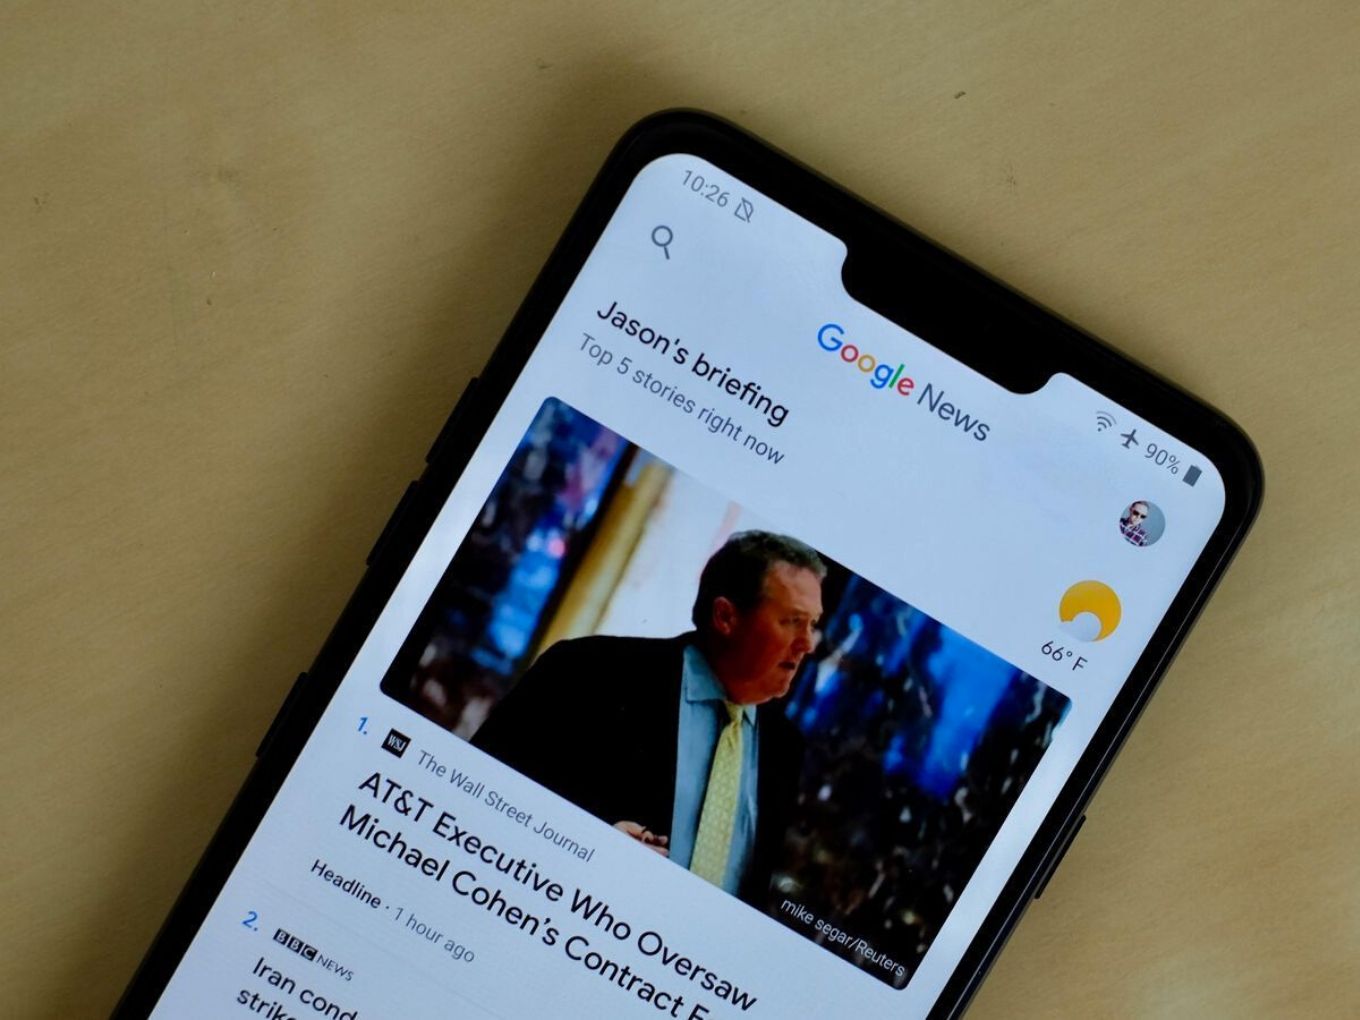 Google News Adds Support For Marathi, Hindi, Tamil and Other Indian Languages